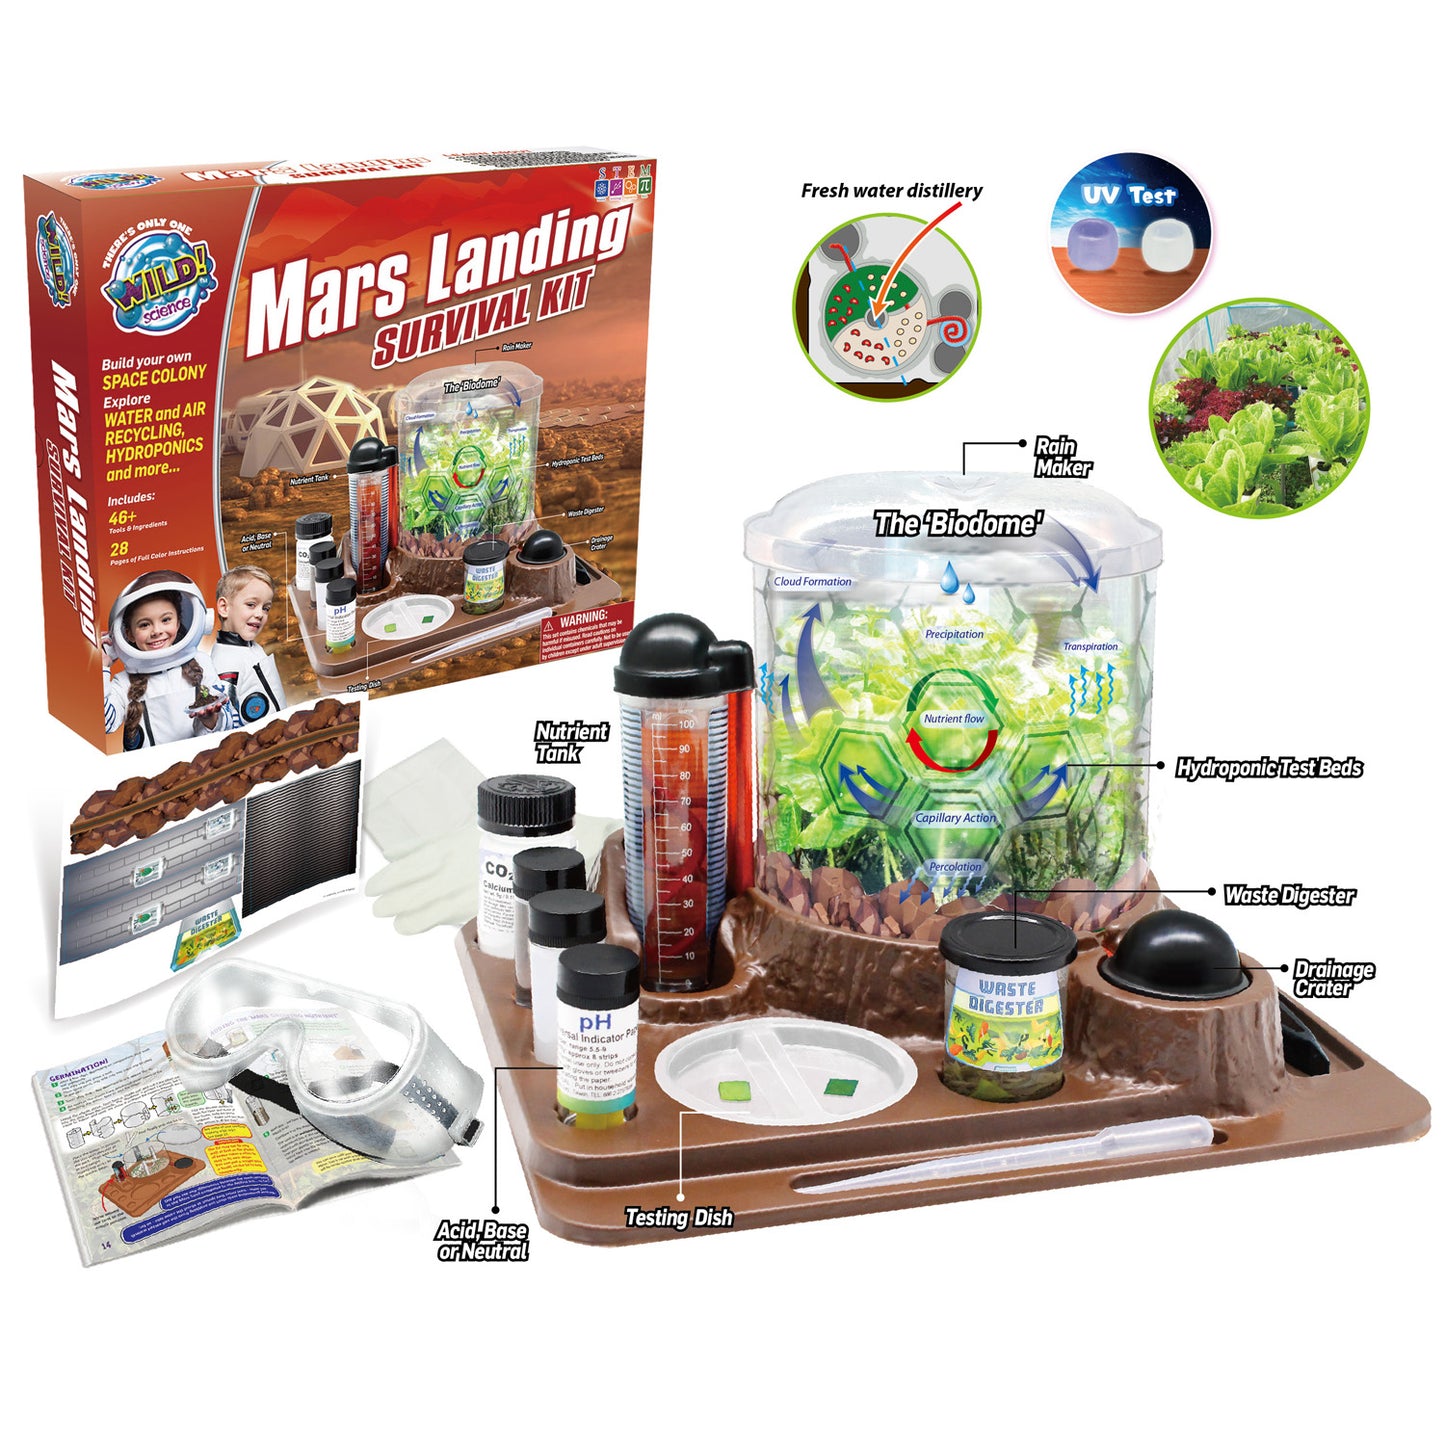 Mars Landing Survival Kit - Home STEM Kit - Ages 8+ - Grow Food & Build an Earth-Like Environment on Mars - Seeds Included